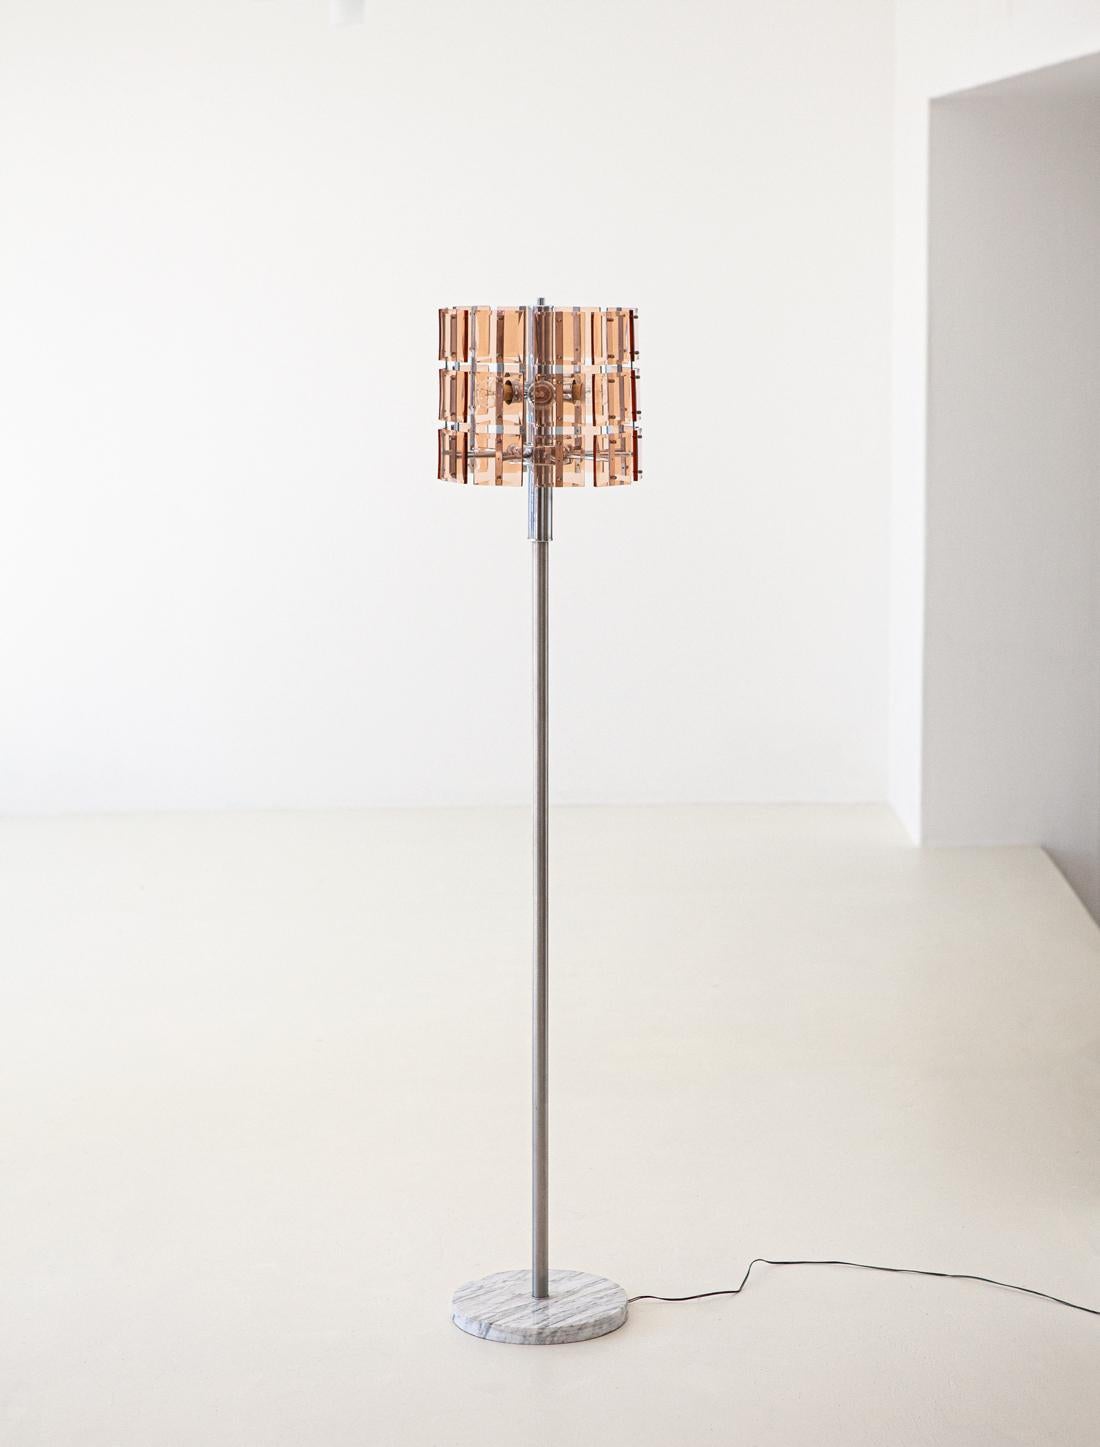 Italian Cognac Glass with Marble Floor Lamp, 1970s For Sale 1